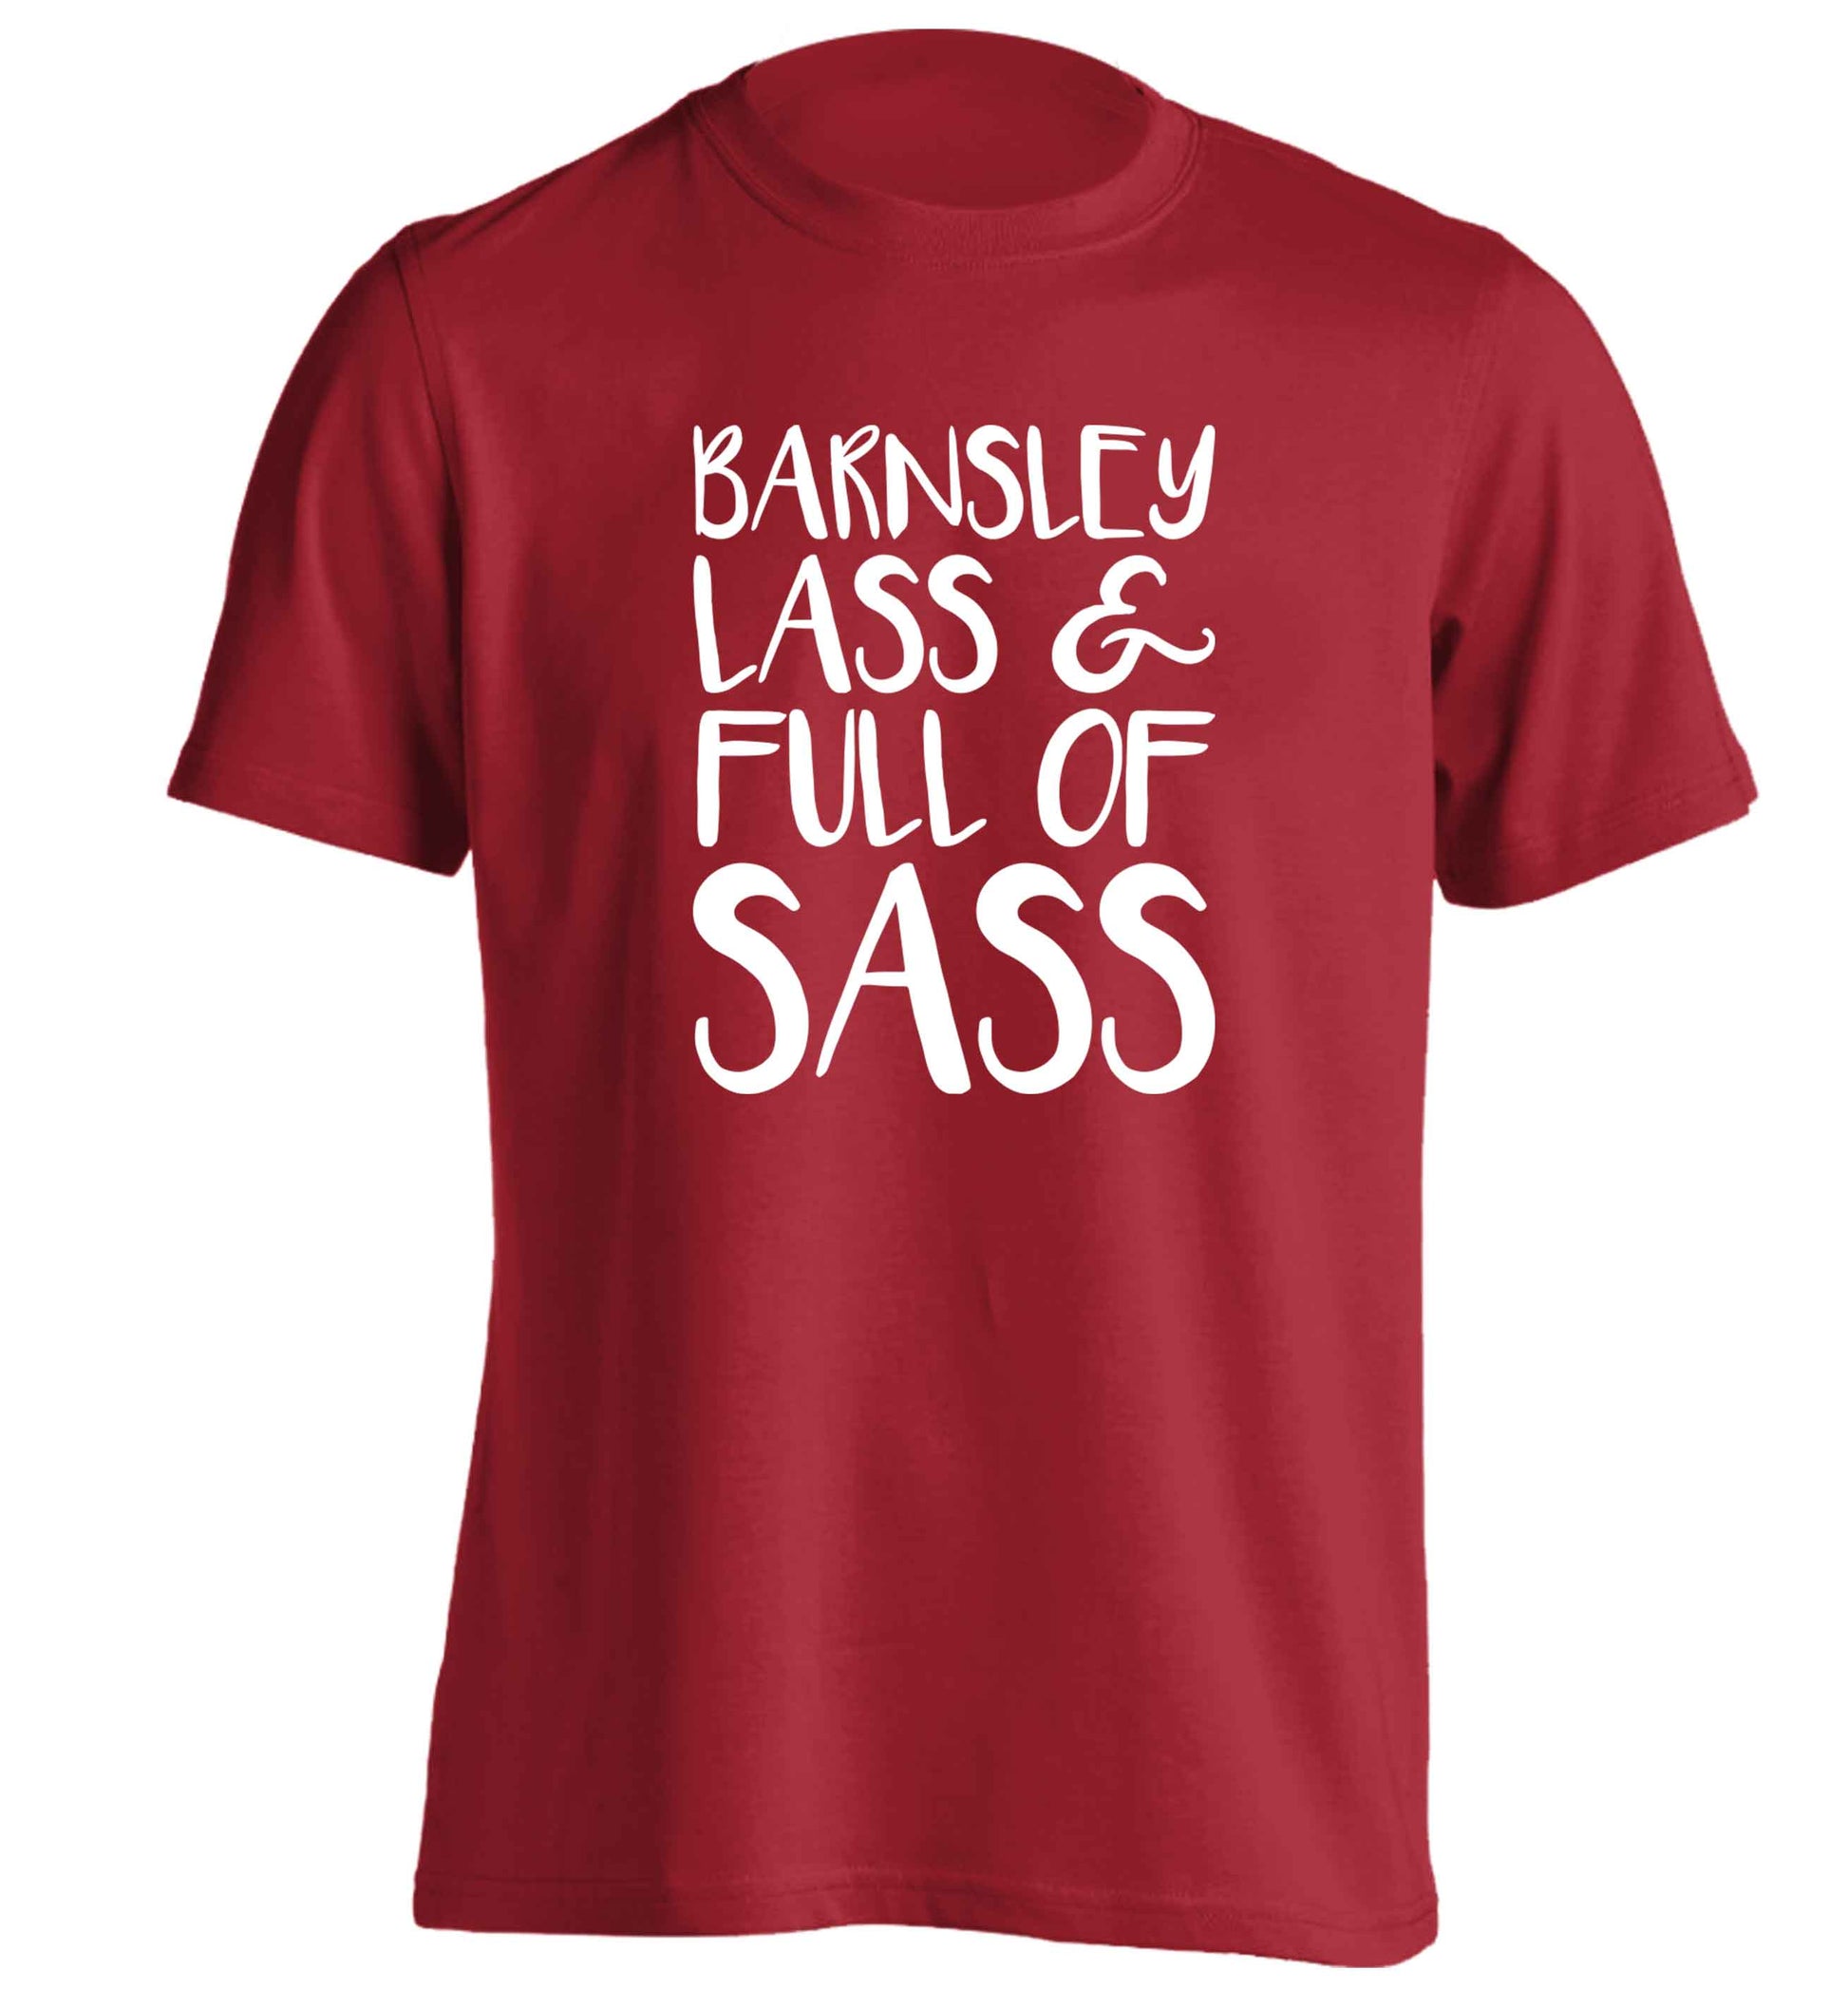 Barnsley lass and full of sass adults unisex red Tshirt 2XL